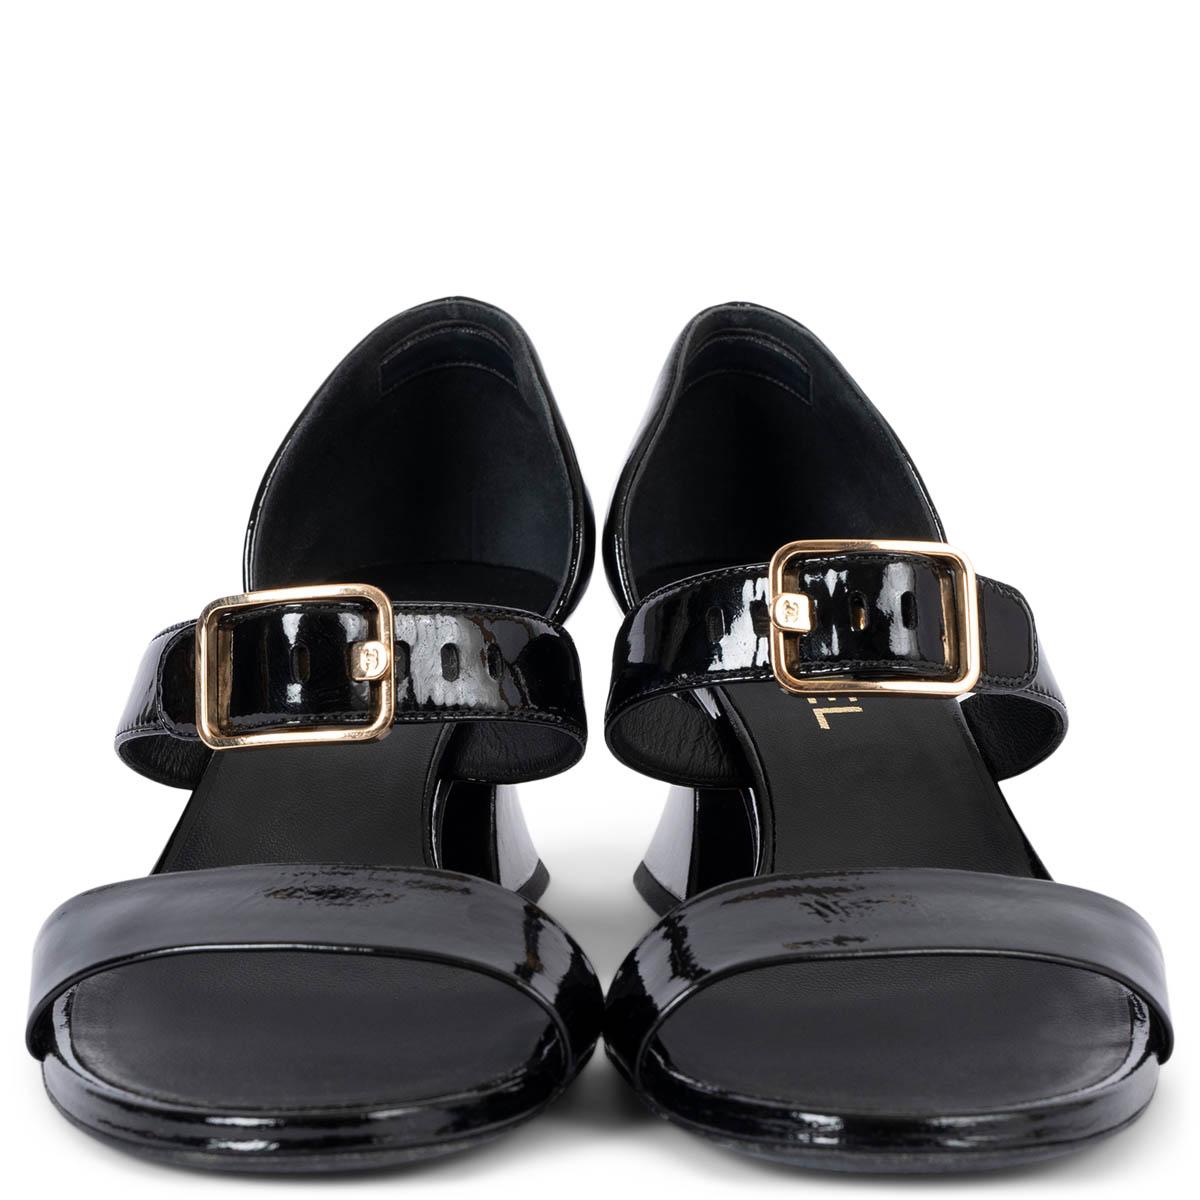 100% authentic Chanel curved block heel sandals in black patent leather with gold-tone logo buckle. Have been worn and are in excellent condition. 

2022 Spring/Summer

Measurements
Model	22S G39050 X56544 94305
Imprinted Size	39
Shoe Size	39
Inside